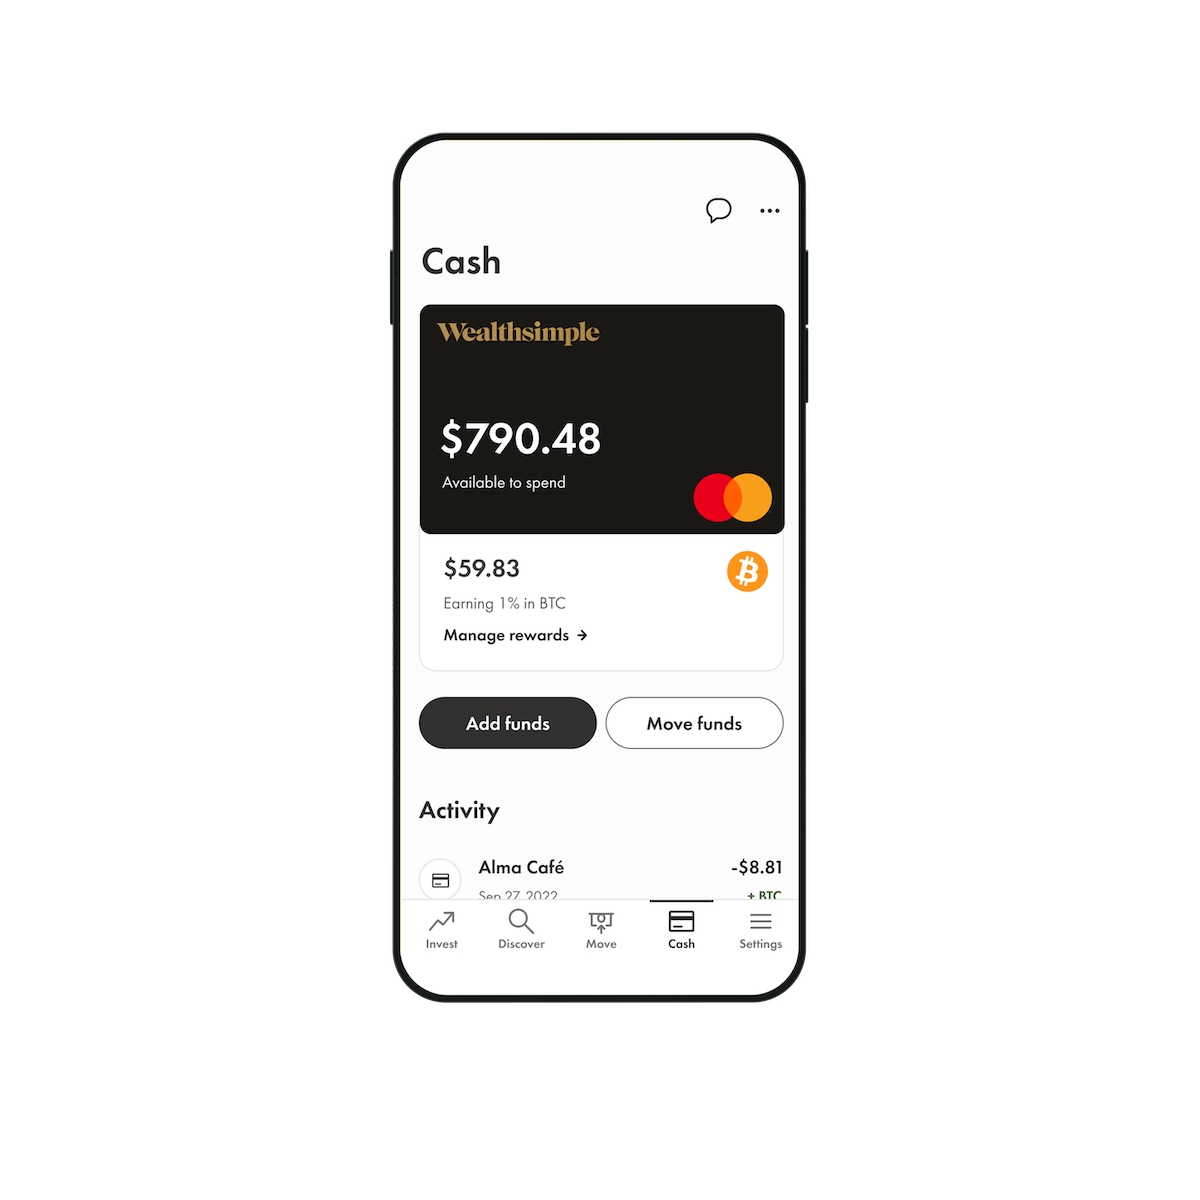 A phone with the Wealthsimple app open showing a black card with the Wealthsimple and Mastercard logos